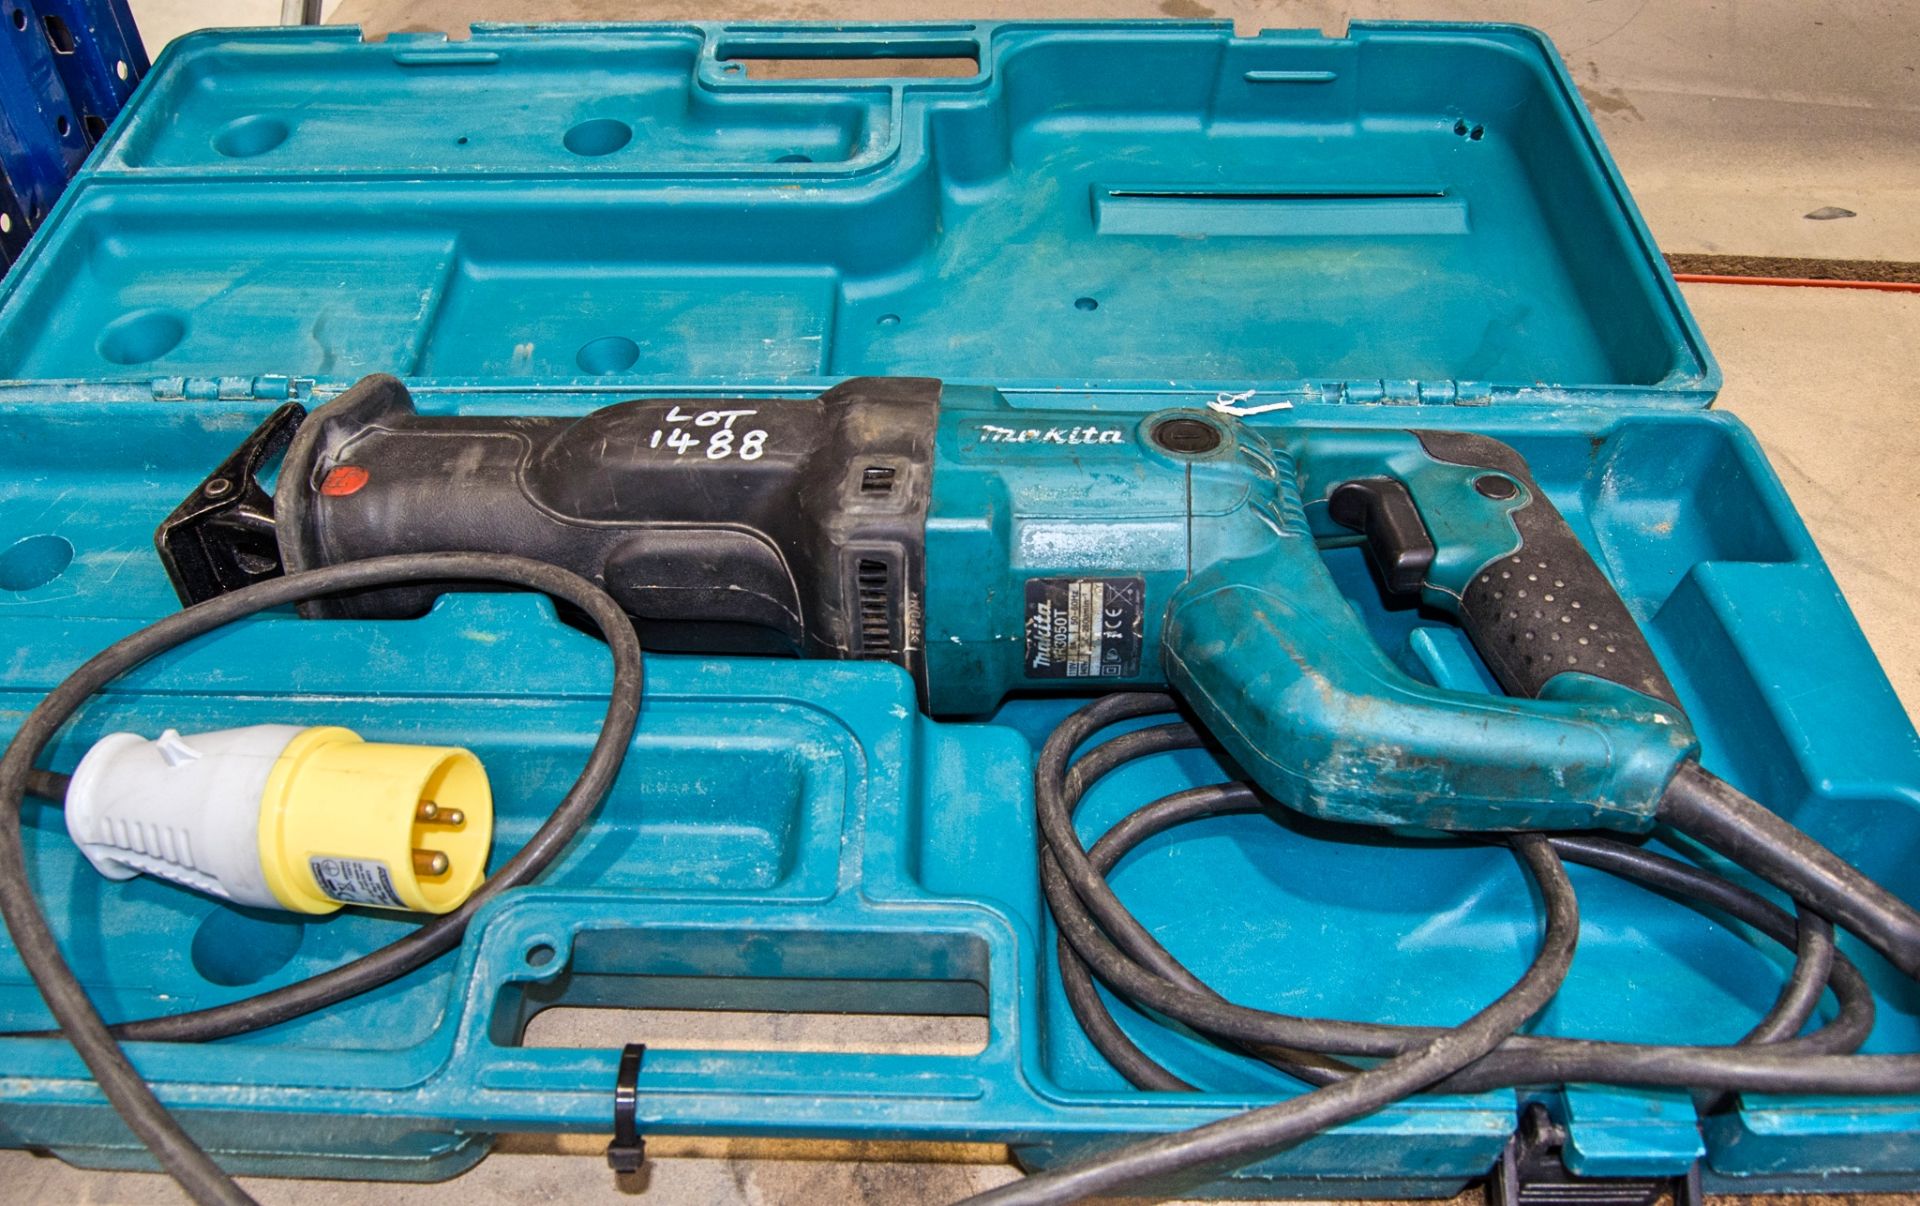 Makita JR3050T 110v reciprocating saw c/w carry case AS4015